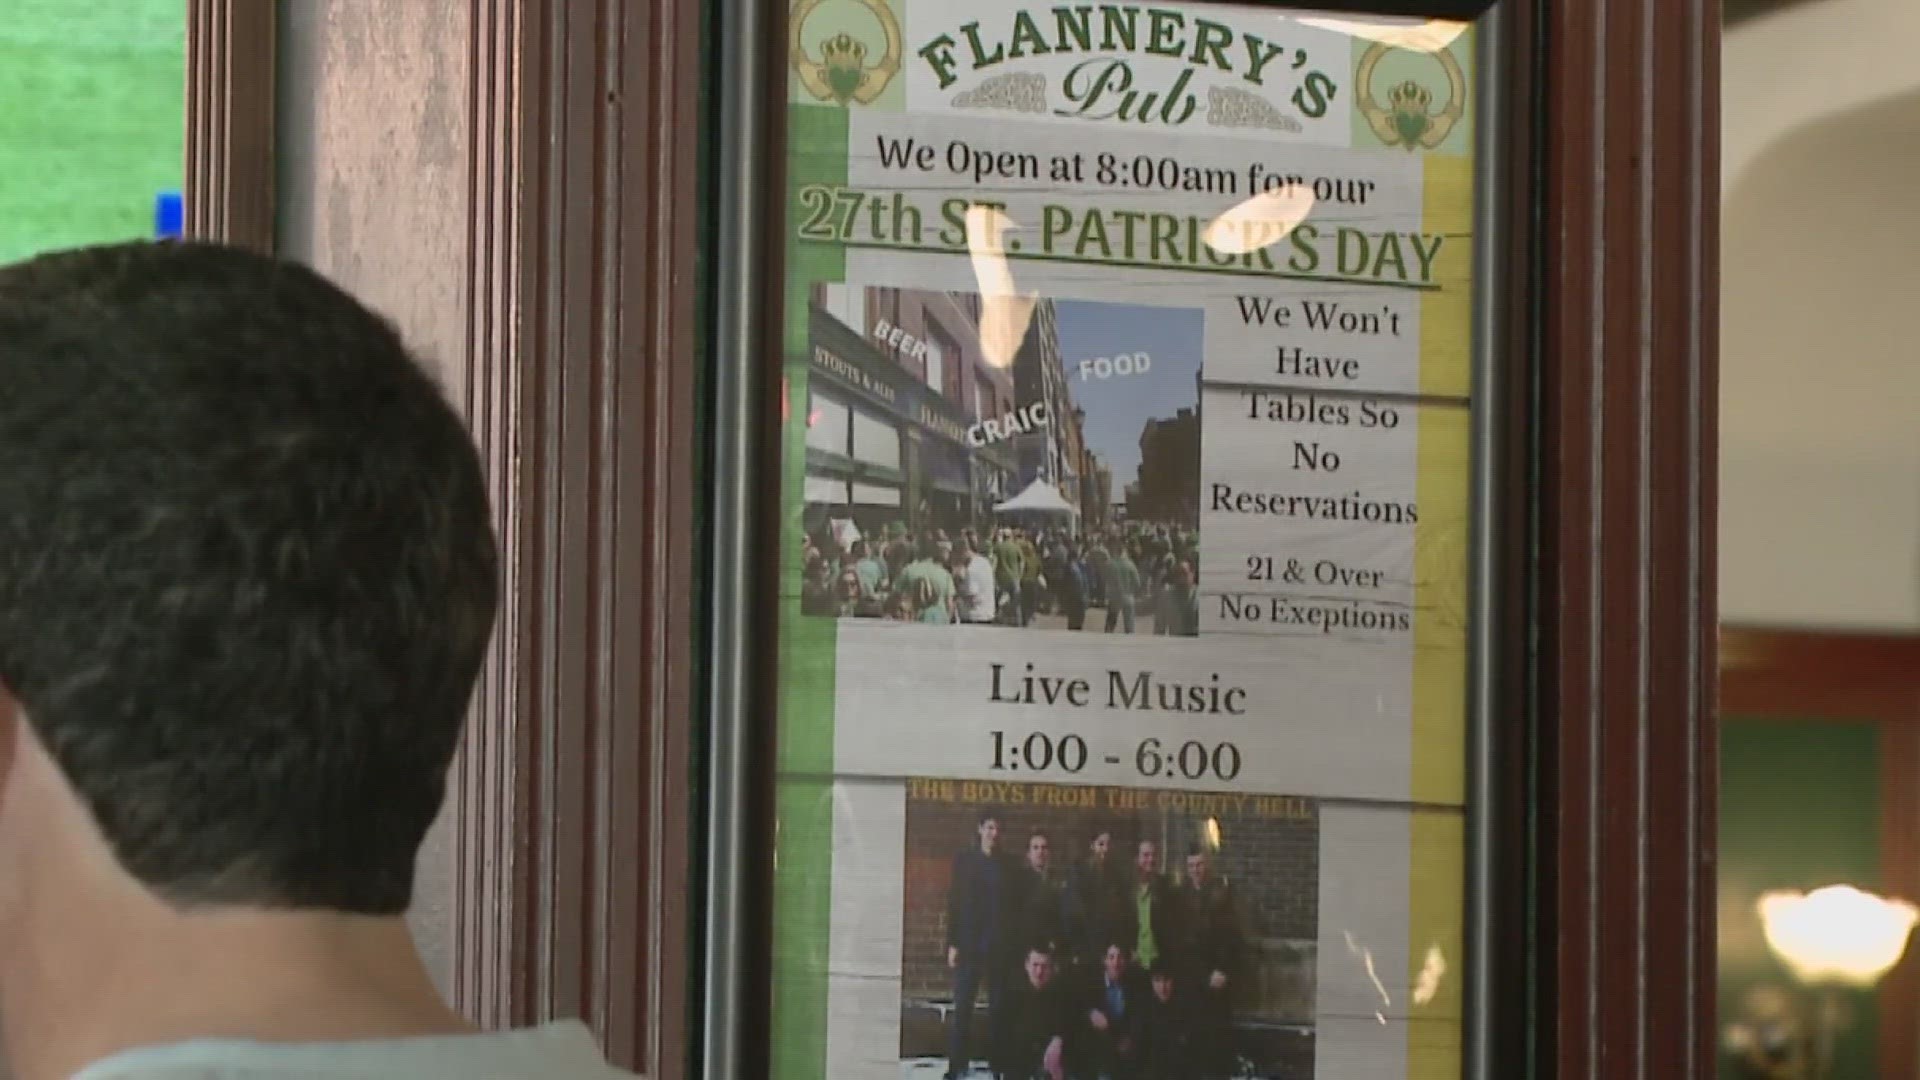 Flannery's Pub General Manager Sean O'Donnell said St. Patrick's Day is the business' biggest day of the year.